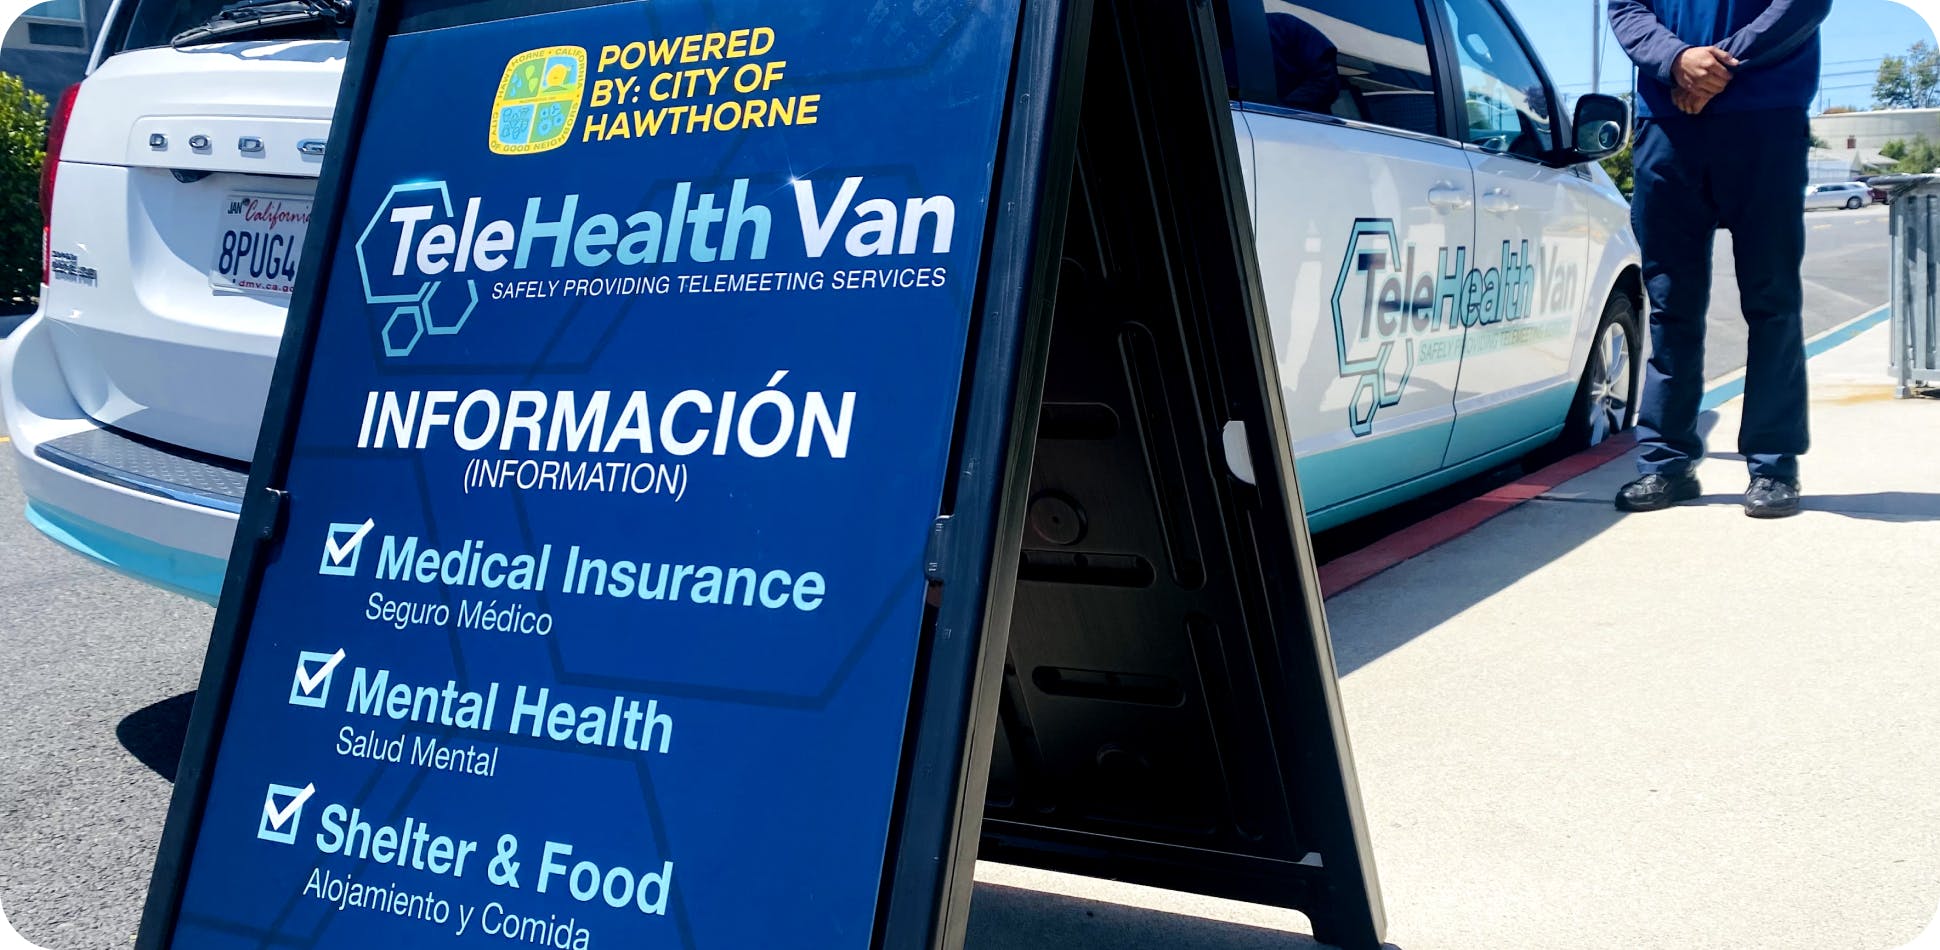 Sandwich board sign in English and Spanish promoting TeleHealth Van Services